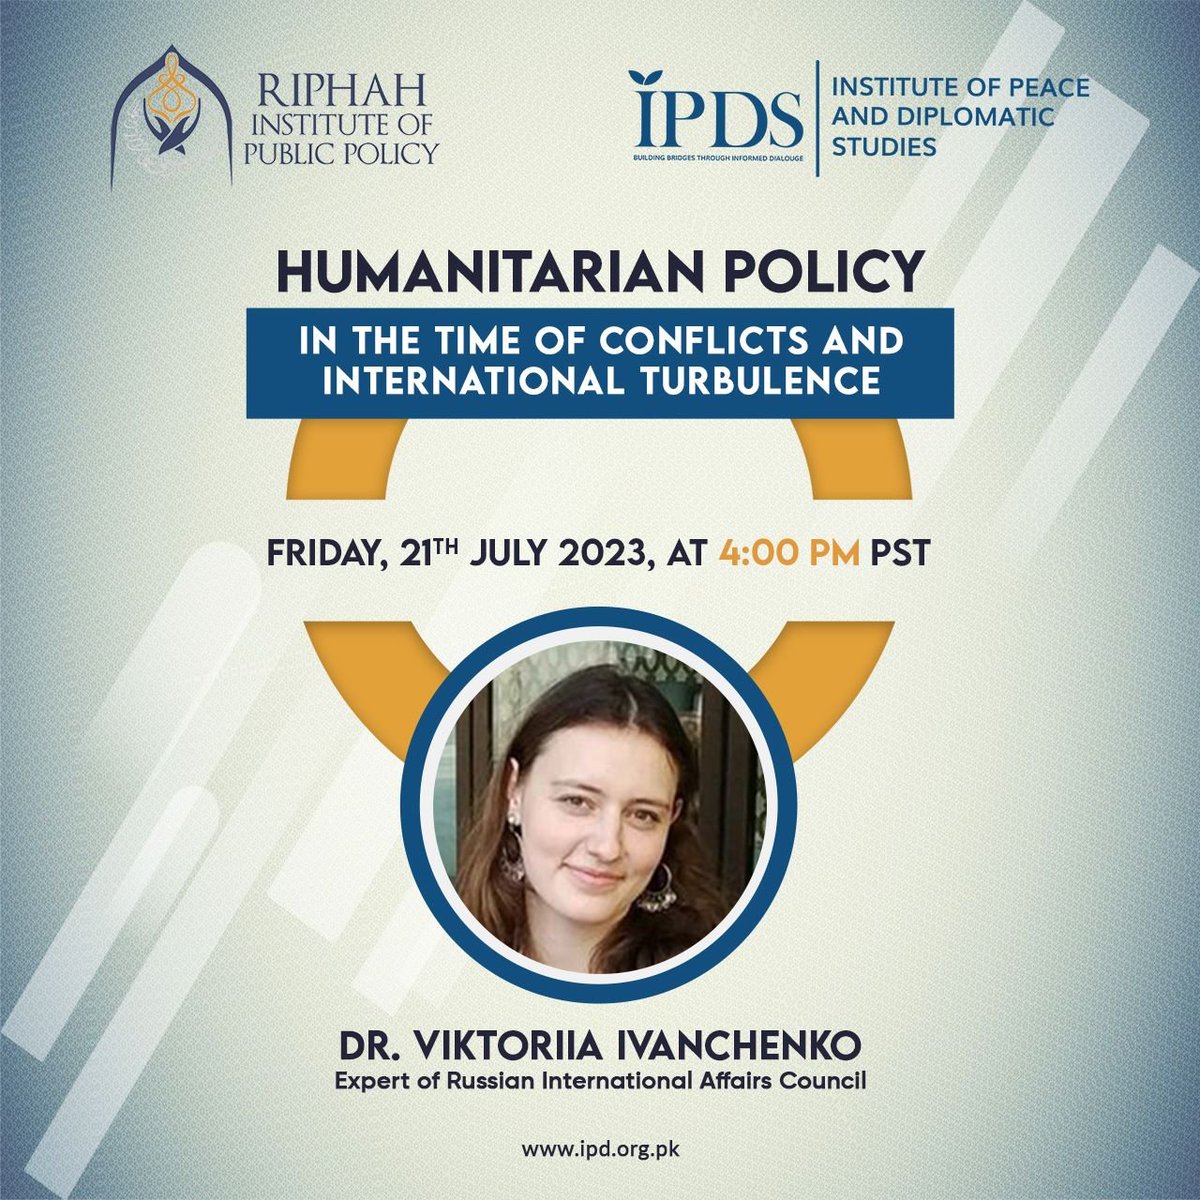 The Contemp #Diplomacy & Intl Rels course, organized by IPDS and RIPP, successfully concluded on Fri with the final session on 'Humanitarian Policy In the Time of Conflicts & Intl Turbulence' led by Dr. Viktoriia Ivanchenko, Expert of Russian International Affairs Council.